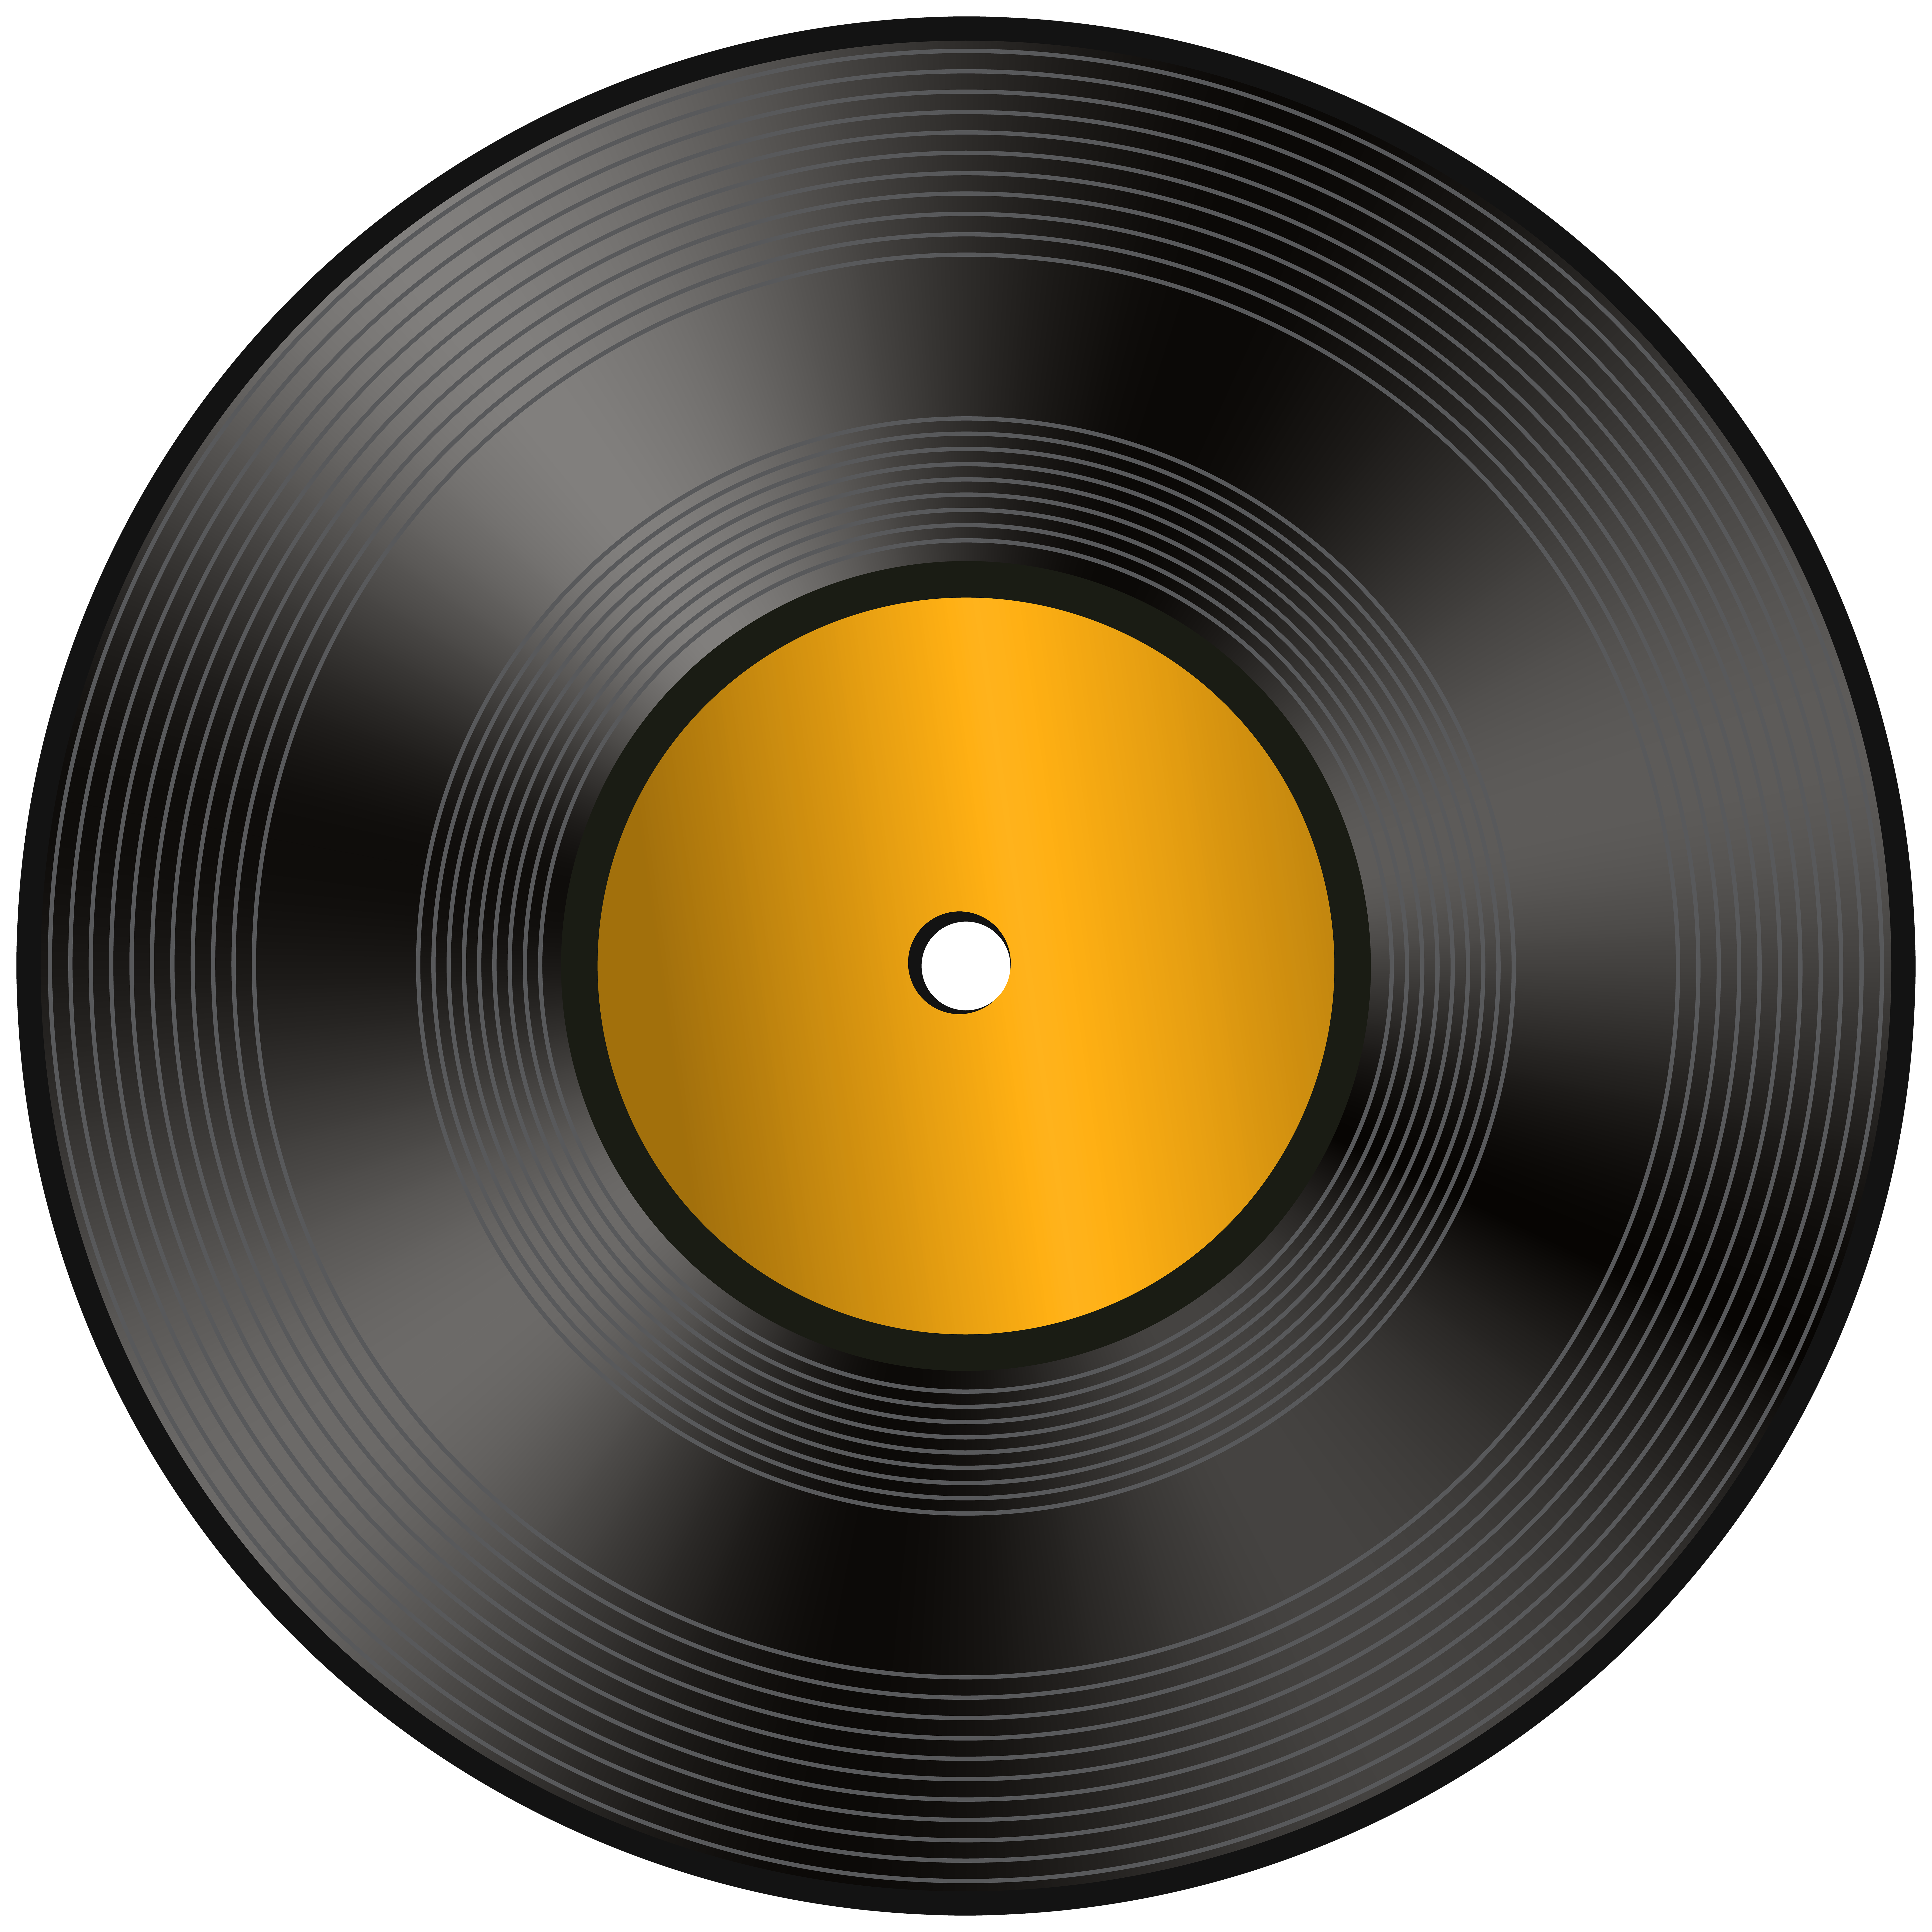 Vinyl Record PNG Clip Art Image | Gallery Yopriceville - High 